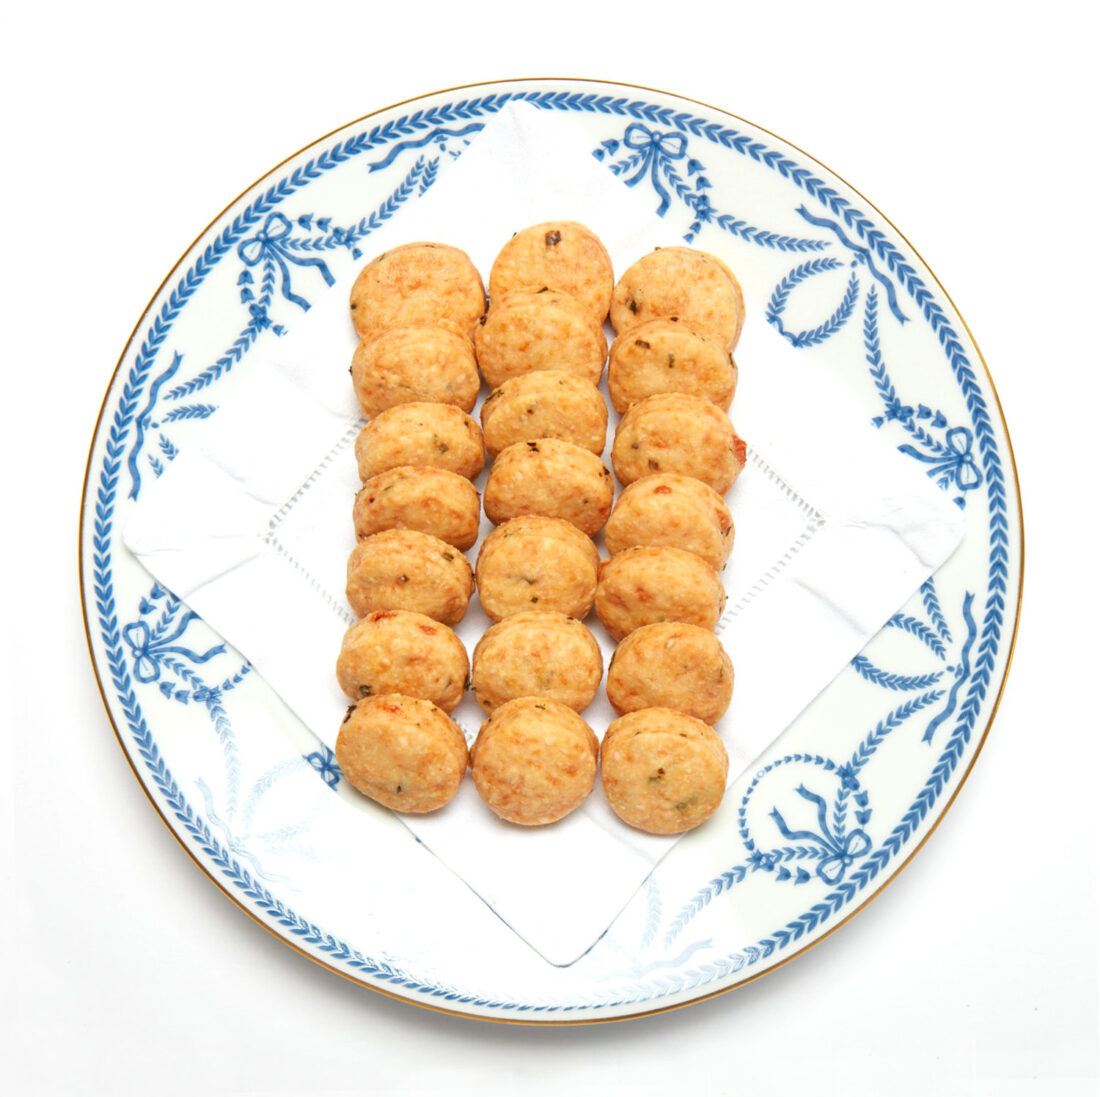 A blue and white patterned plate of cheddar wafers